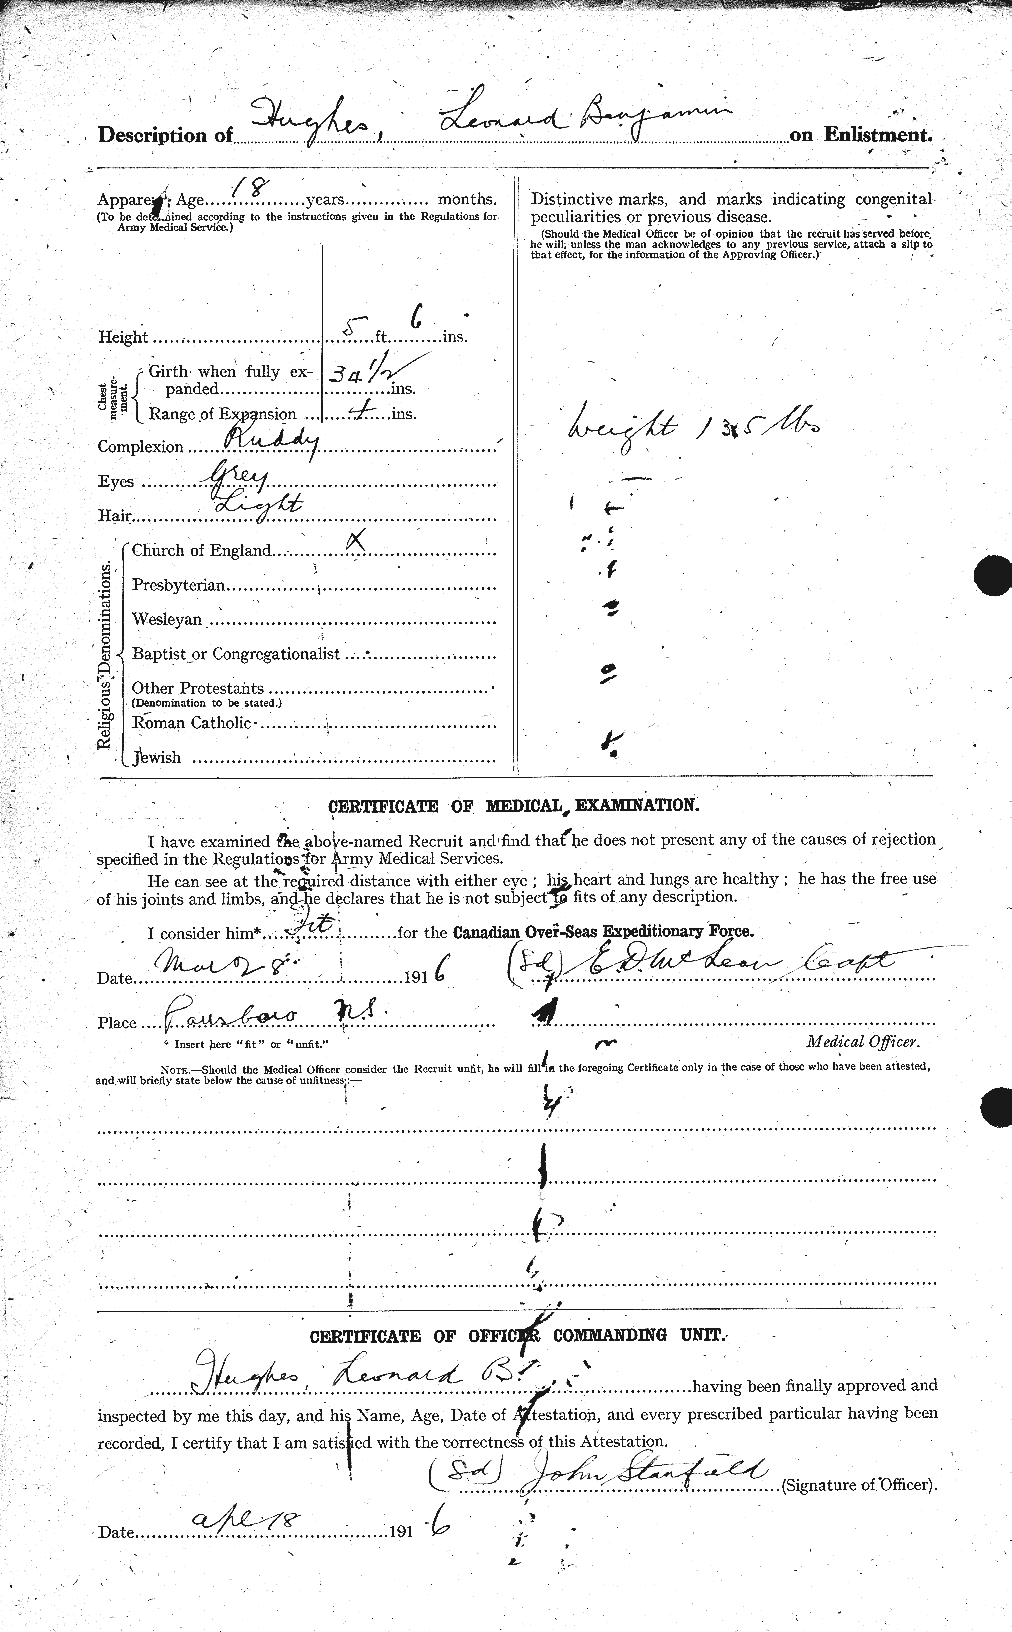 Personnel Records of the First World War - CEF 404099b